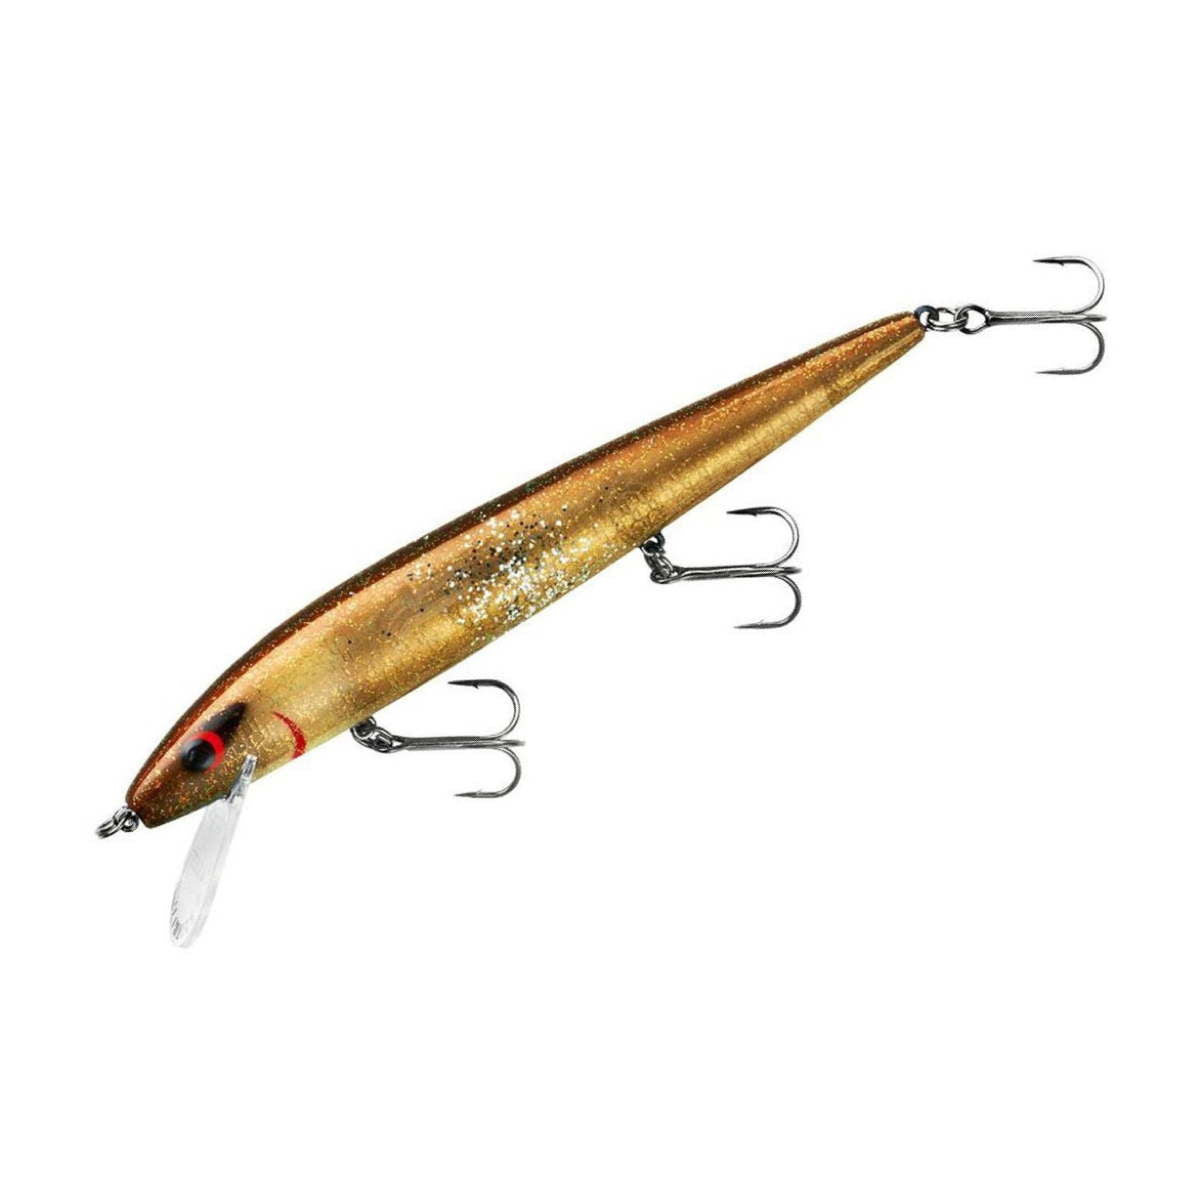 Photo of Smithwick Perfect 10 Rogue for sale at United Tackle Shops.